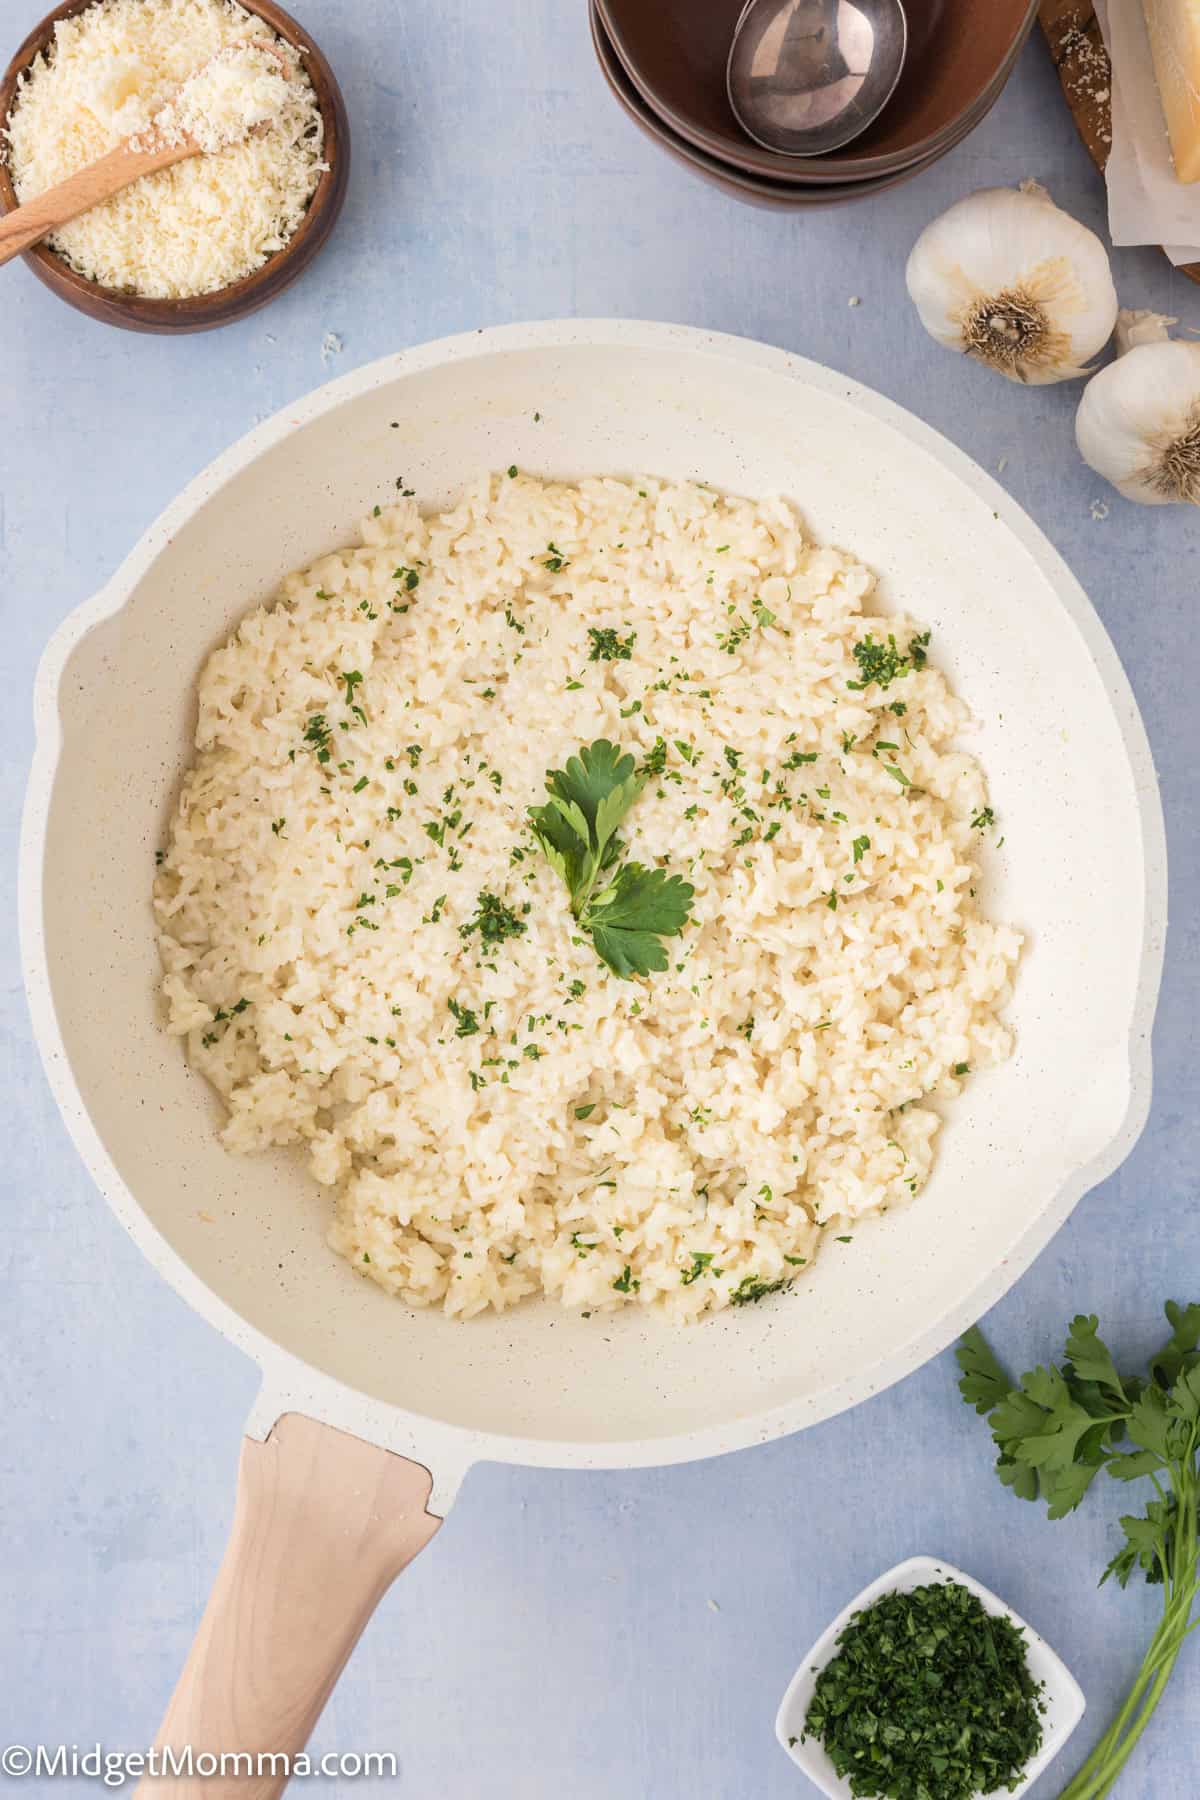 A bowl of creamy rice garnished with parsley, surrounded by ingredients like garlic,  herbs on a light blue surface.